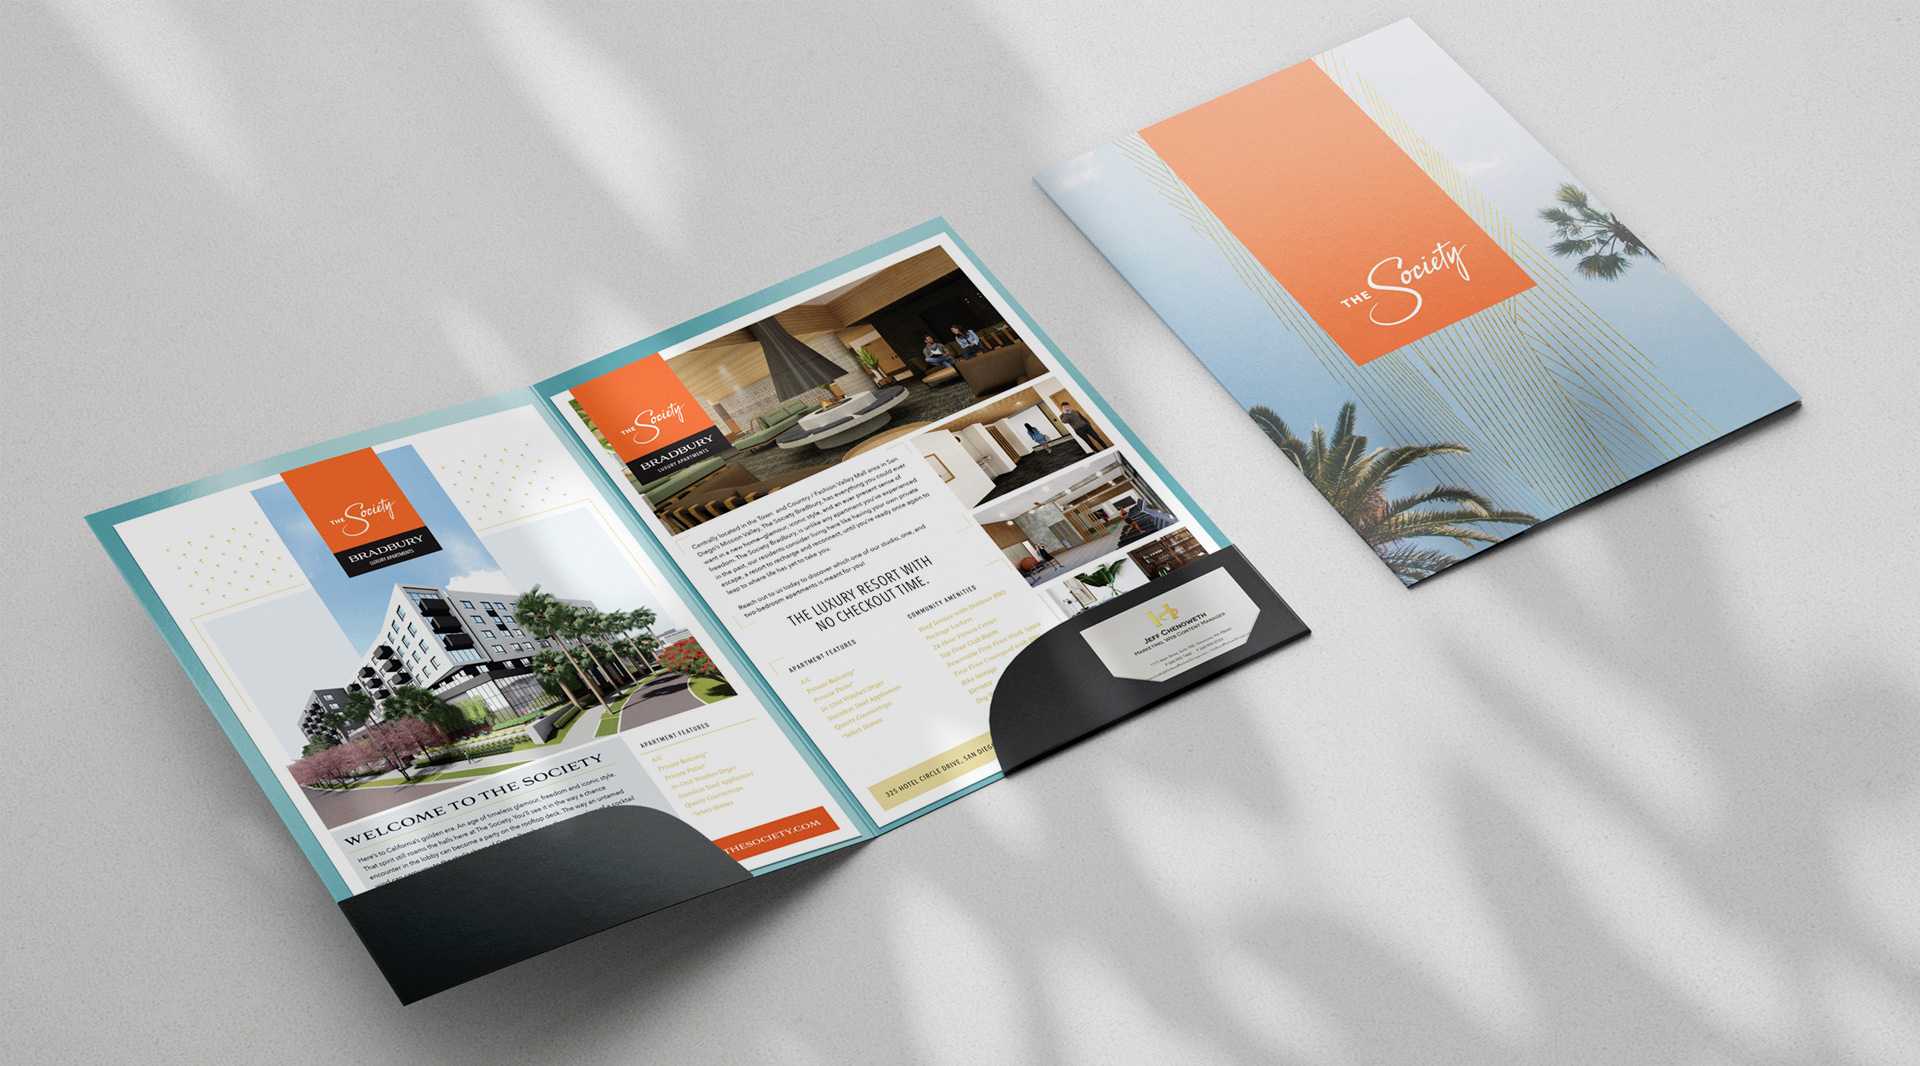 The Society apartments branding brochure created by Incubate Design for Holland Residential